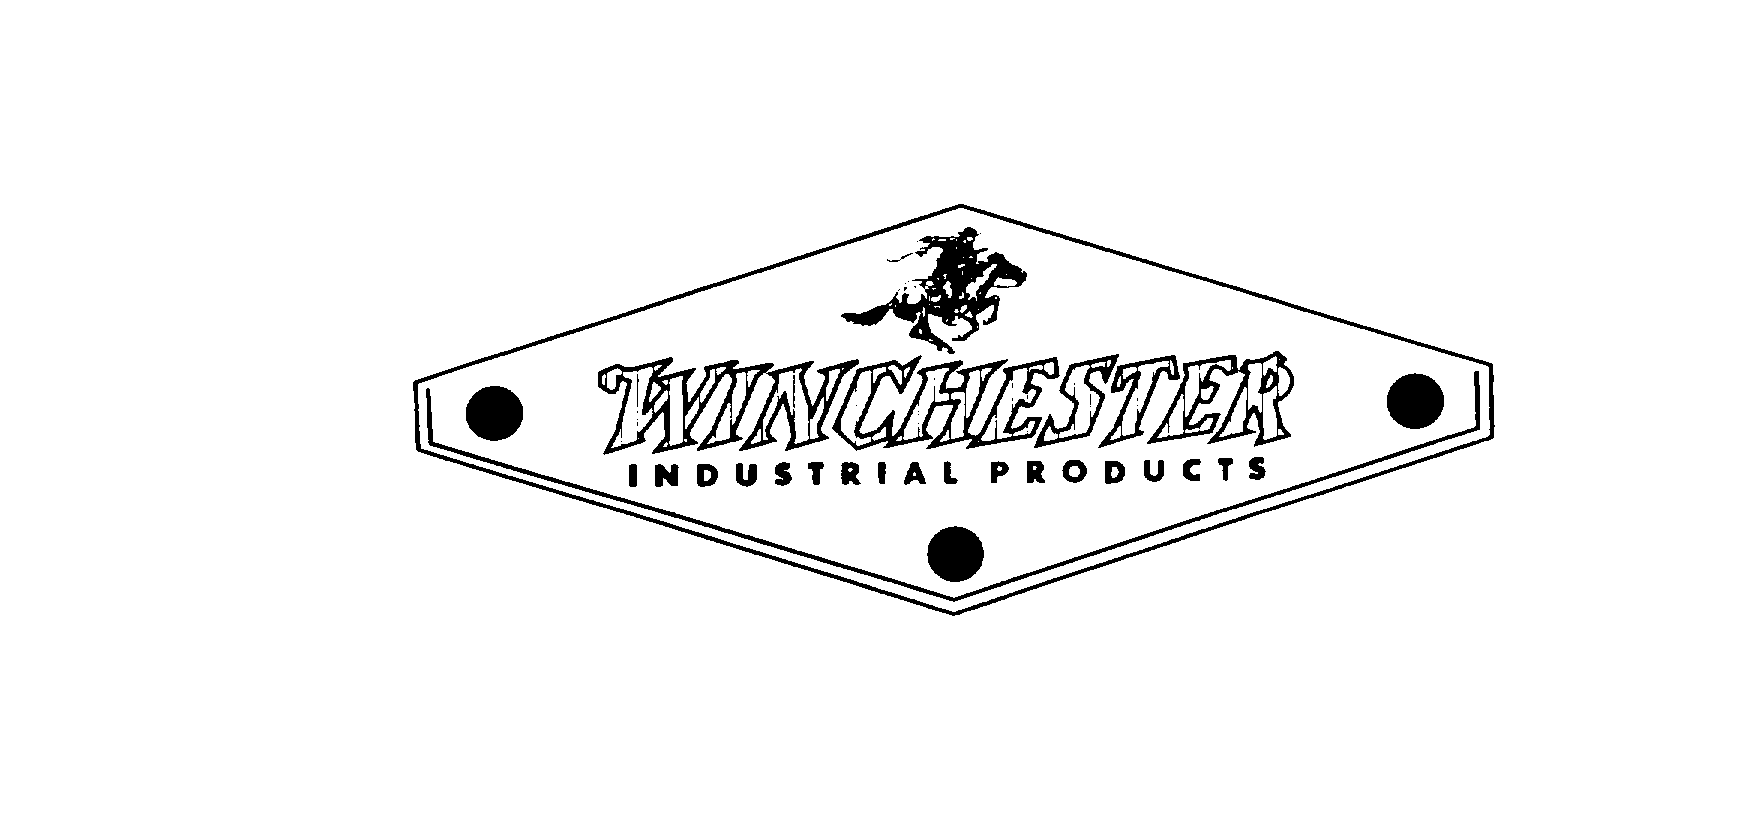  WINCHESTER INDUSTRIAL PRODUCTS